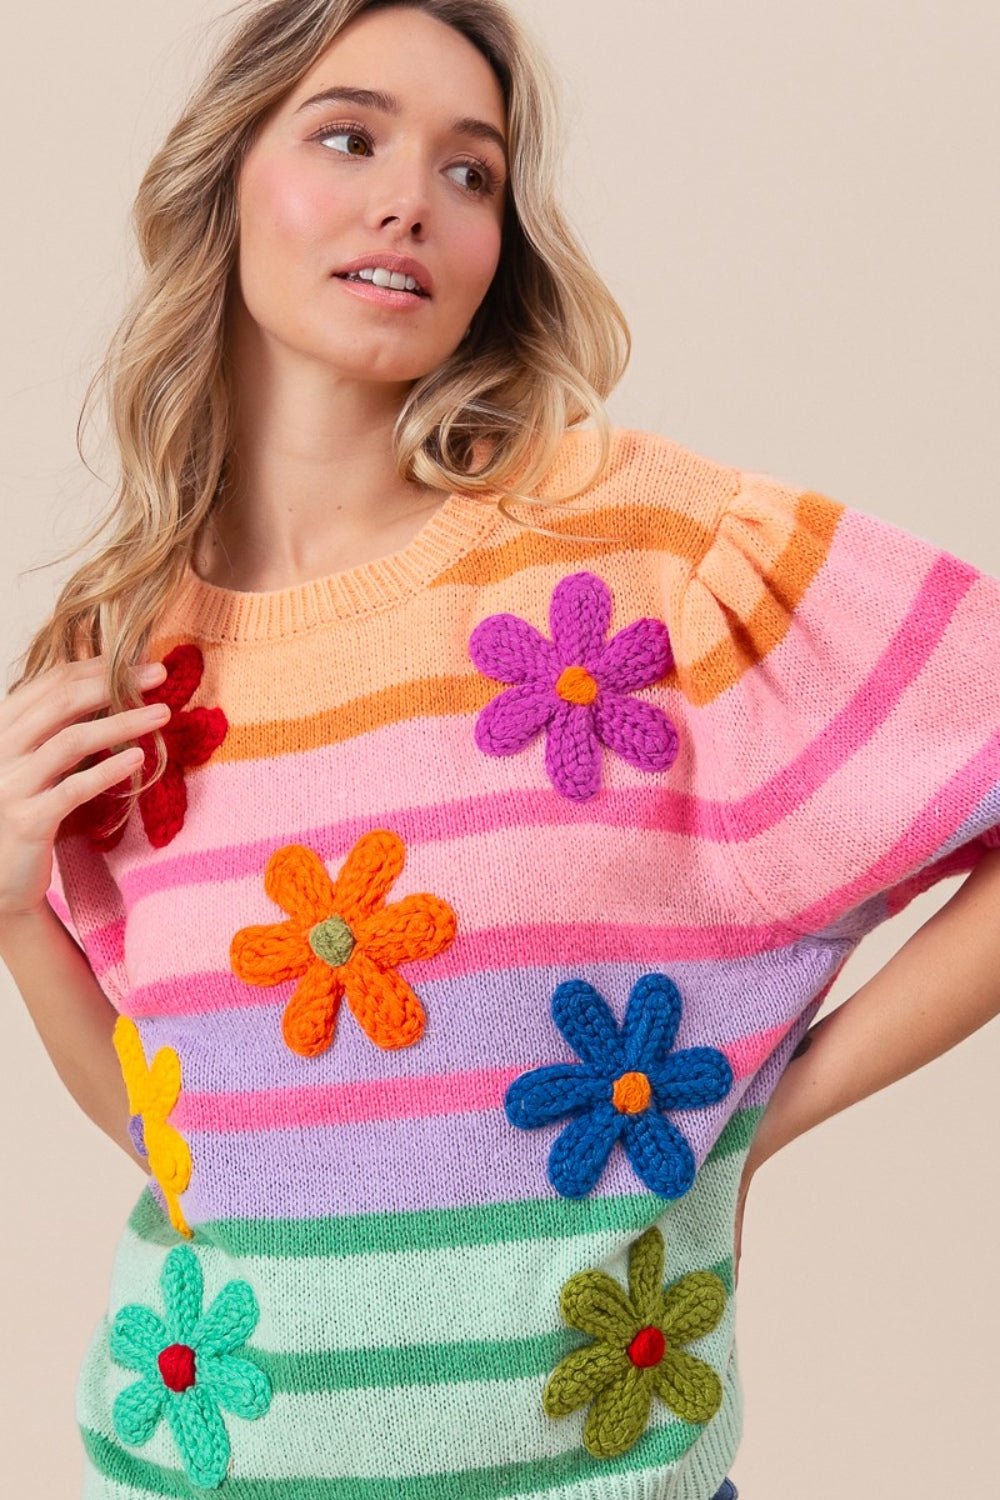 Flower Patch Puff Sleeve Striped Sweater in Apricot MultiSweaterBiBi